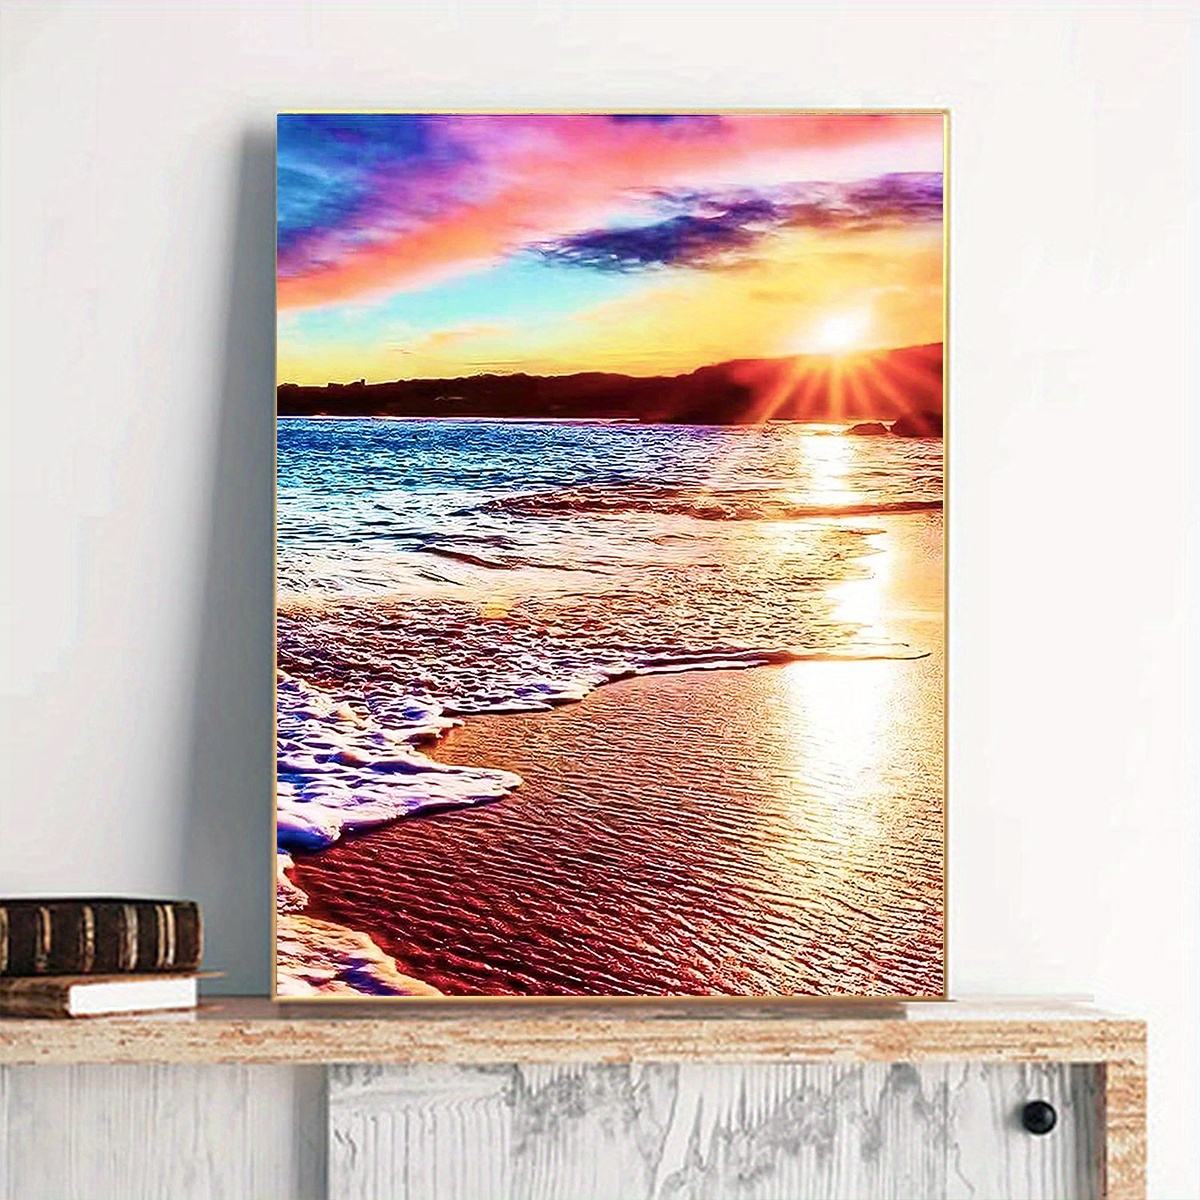 New Large Size Diamond Painting 5D DIY Beach Landscape Decorative Painting  Frameless Living Room Bedroom Decoration Gift Painting 40*70cm/15.7*27.5in